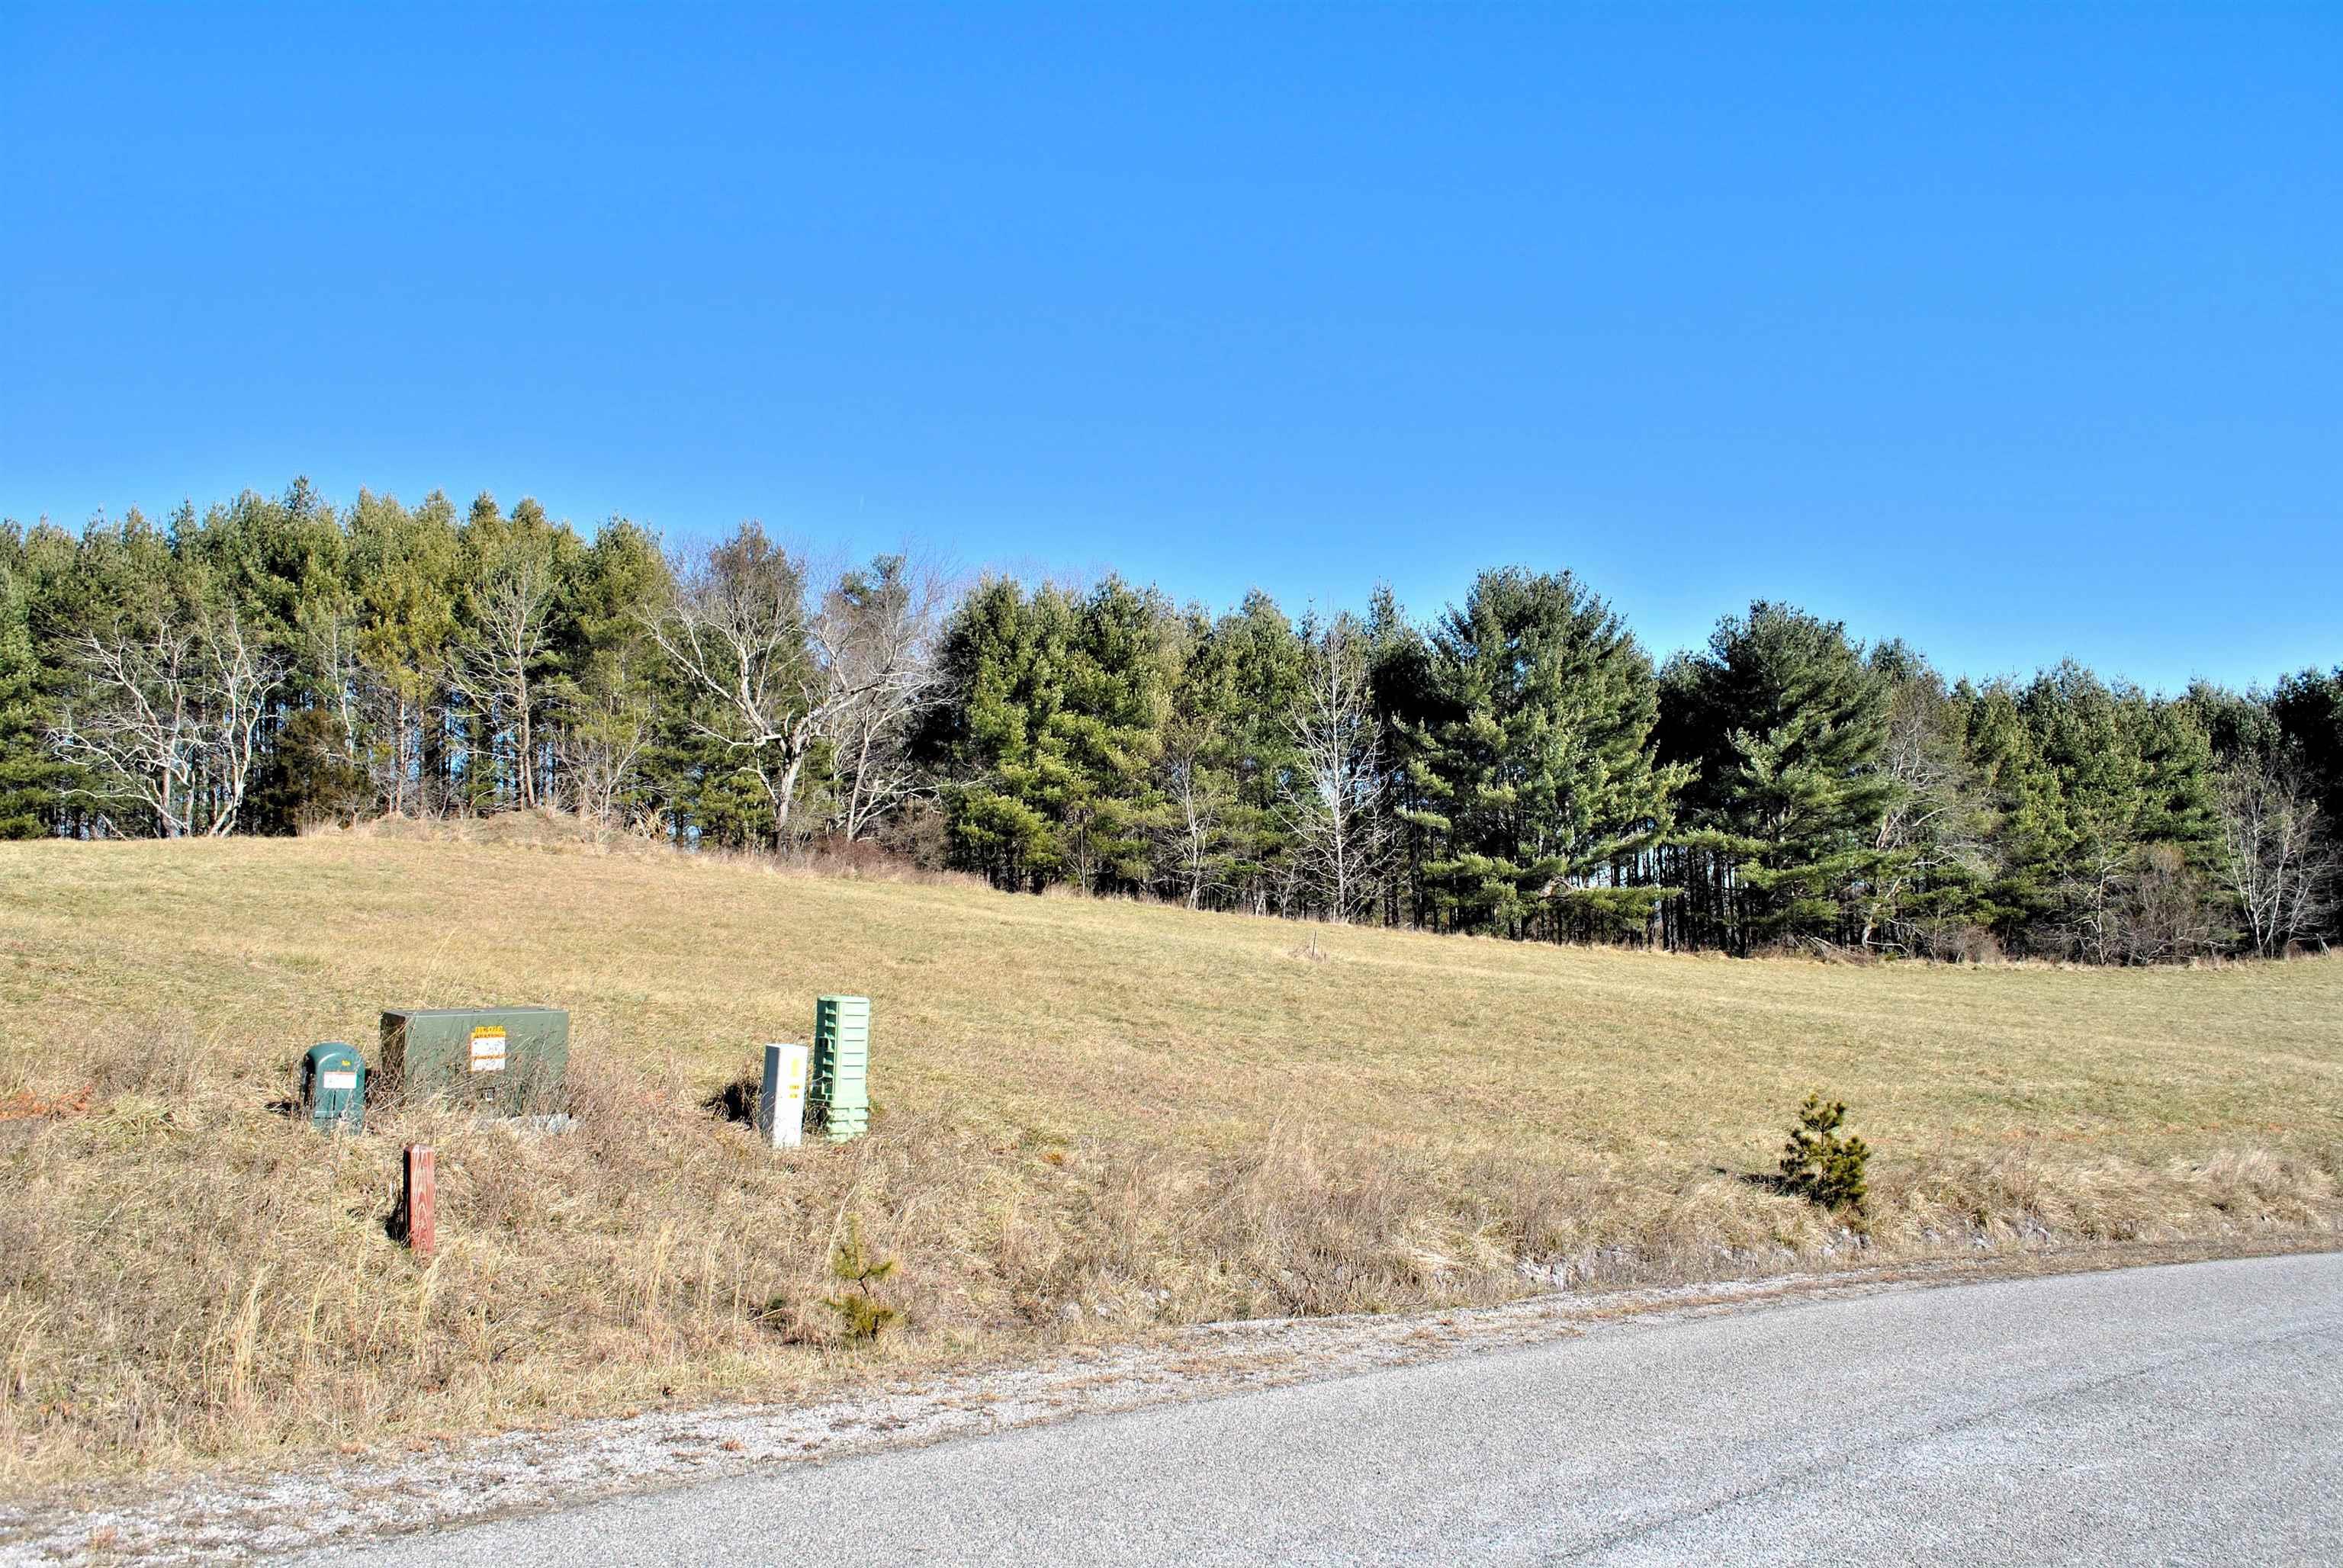 Build your dream on this open lot with great mountain views!  Property has High Speed Internet available with Fiber Optic Cable at the property so you can work from home!  The property has perk test completed for a 3 bedroom home.  Conveniently located within 15 to 20 minutes to I-81, Christiansburg, Blacksburg, VT, Radford, RU, Carilion Hospital, Montgomery Regional Hospital, etc... Country living at is finest!  Call for a private showing!